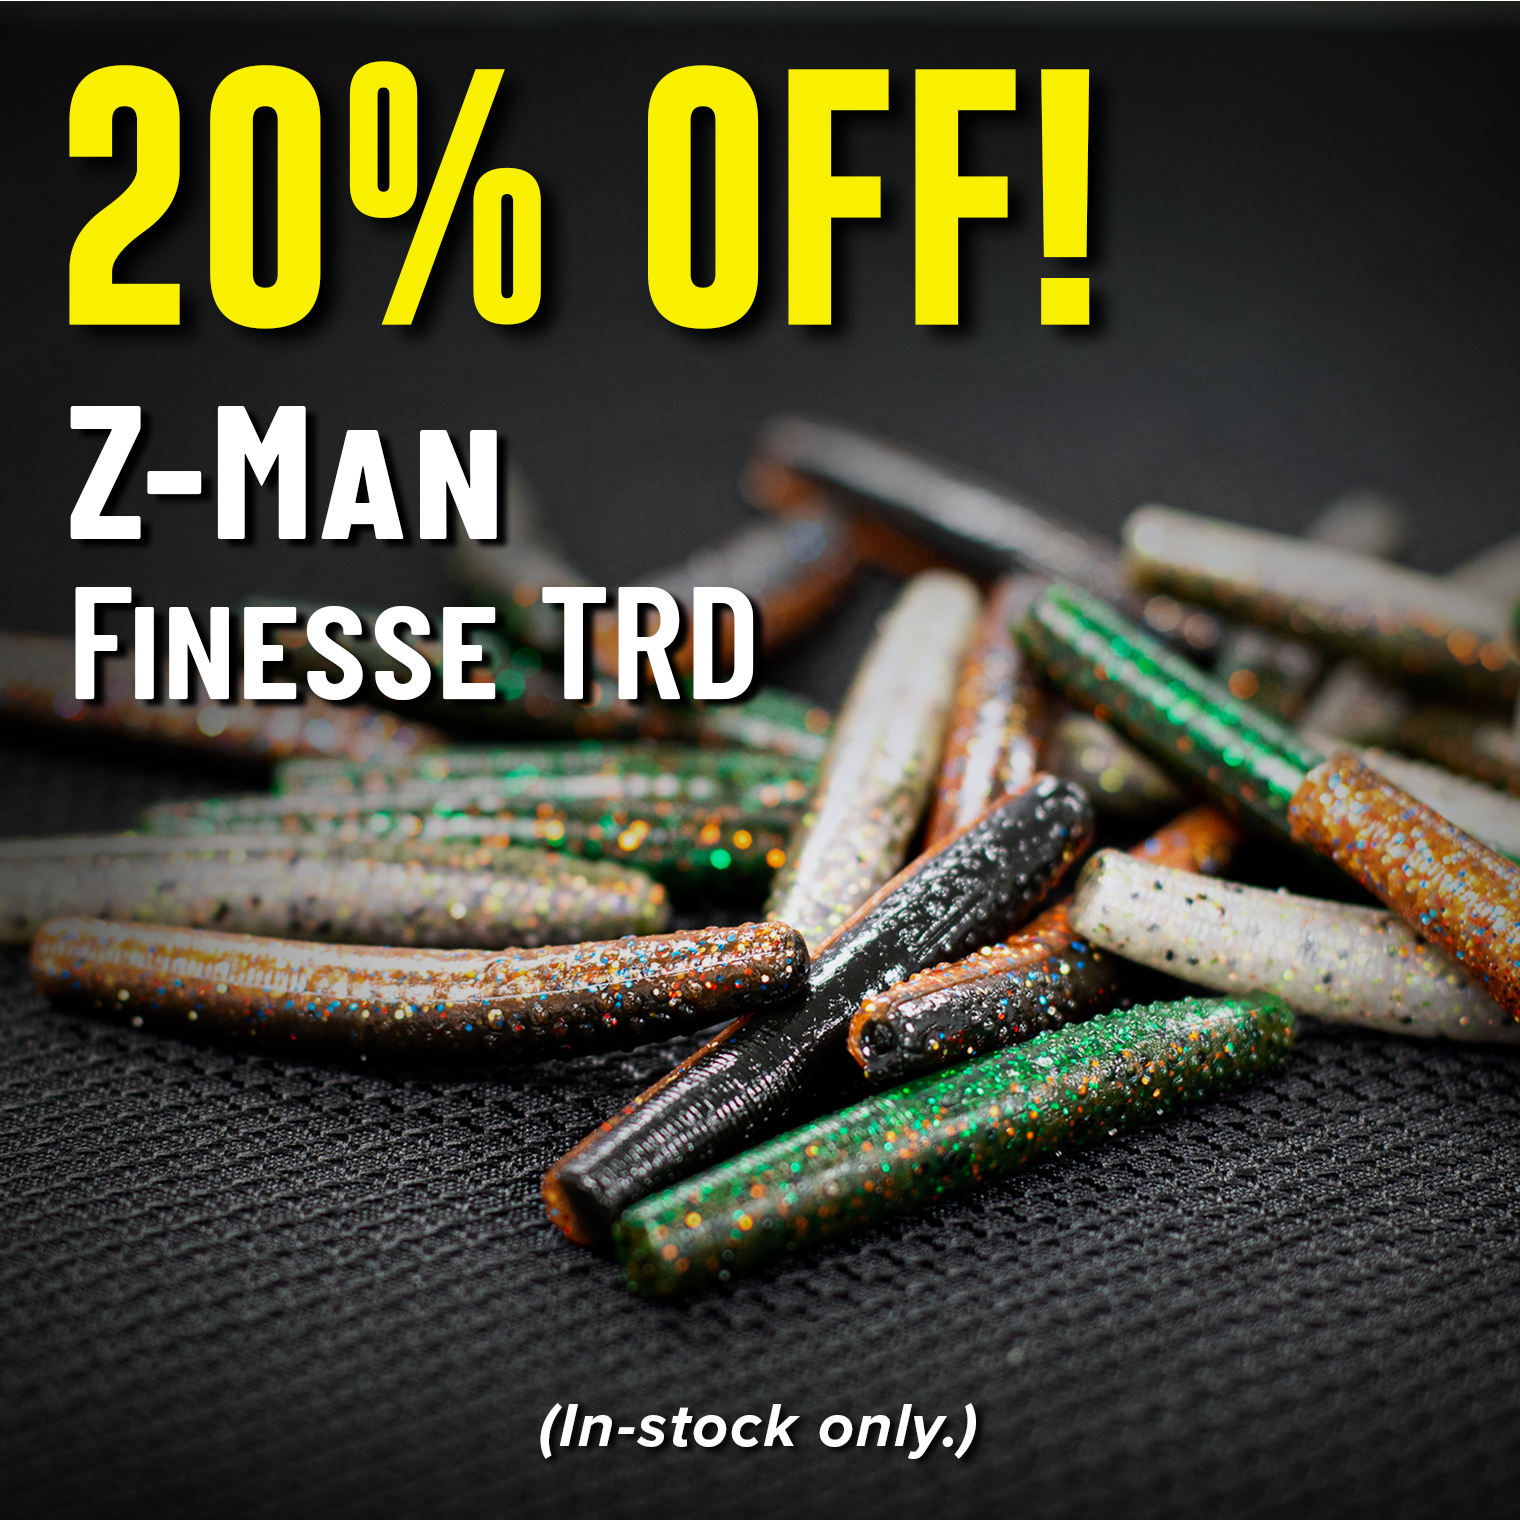 20% Off! Z-Man Finesse TRD (In-stock only.)